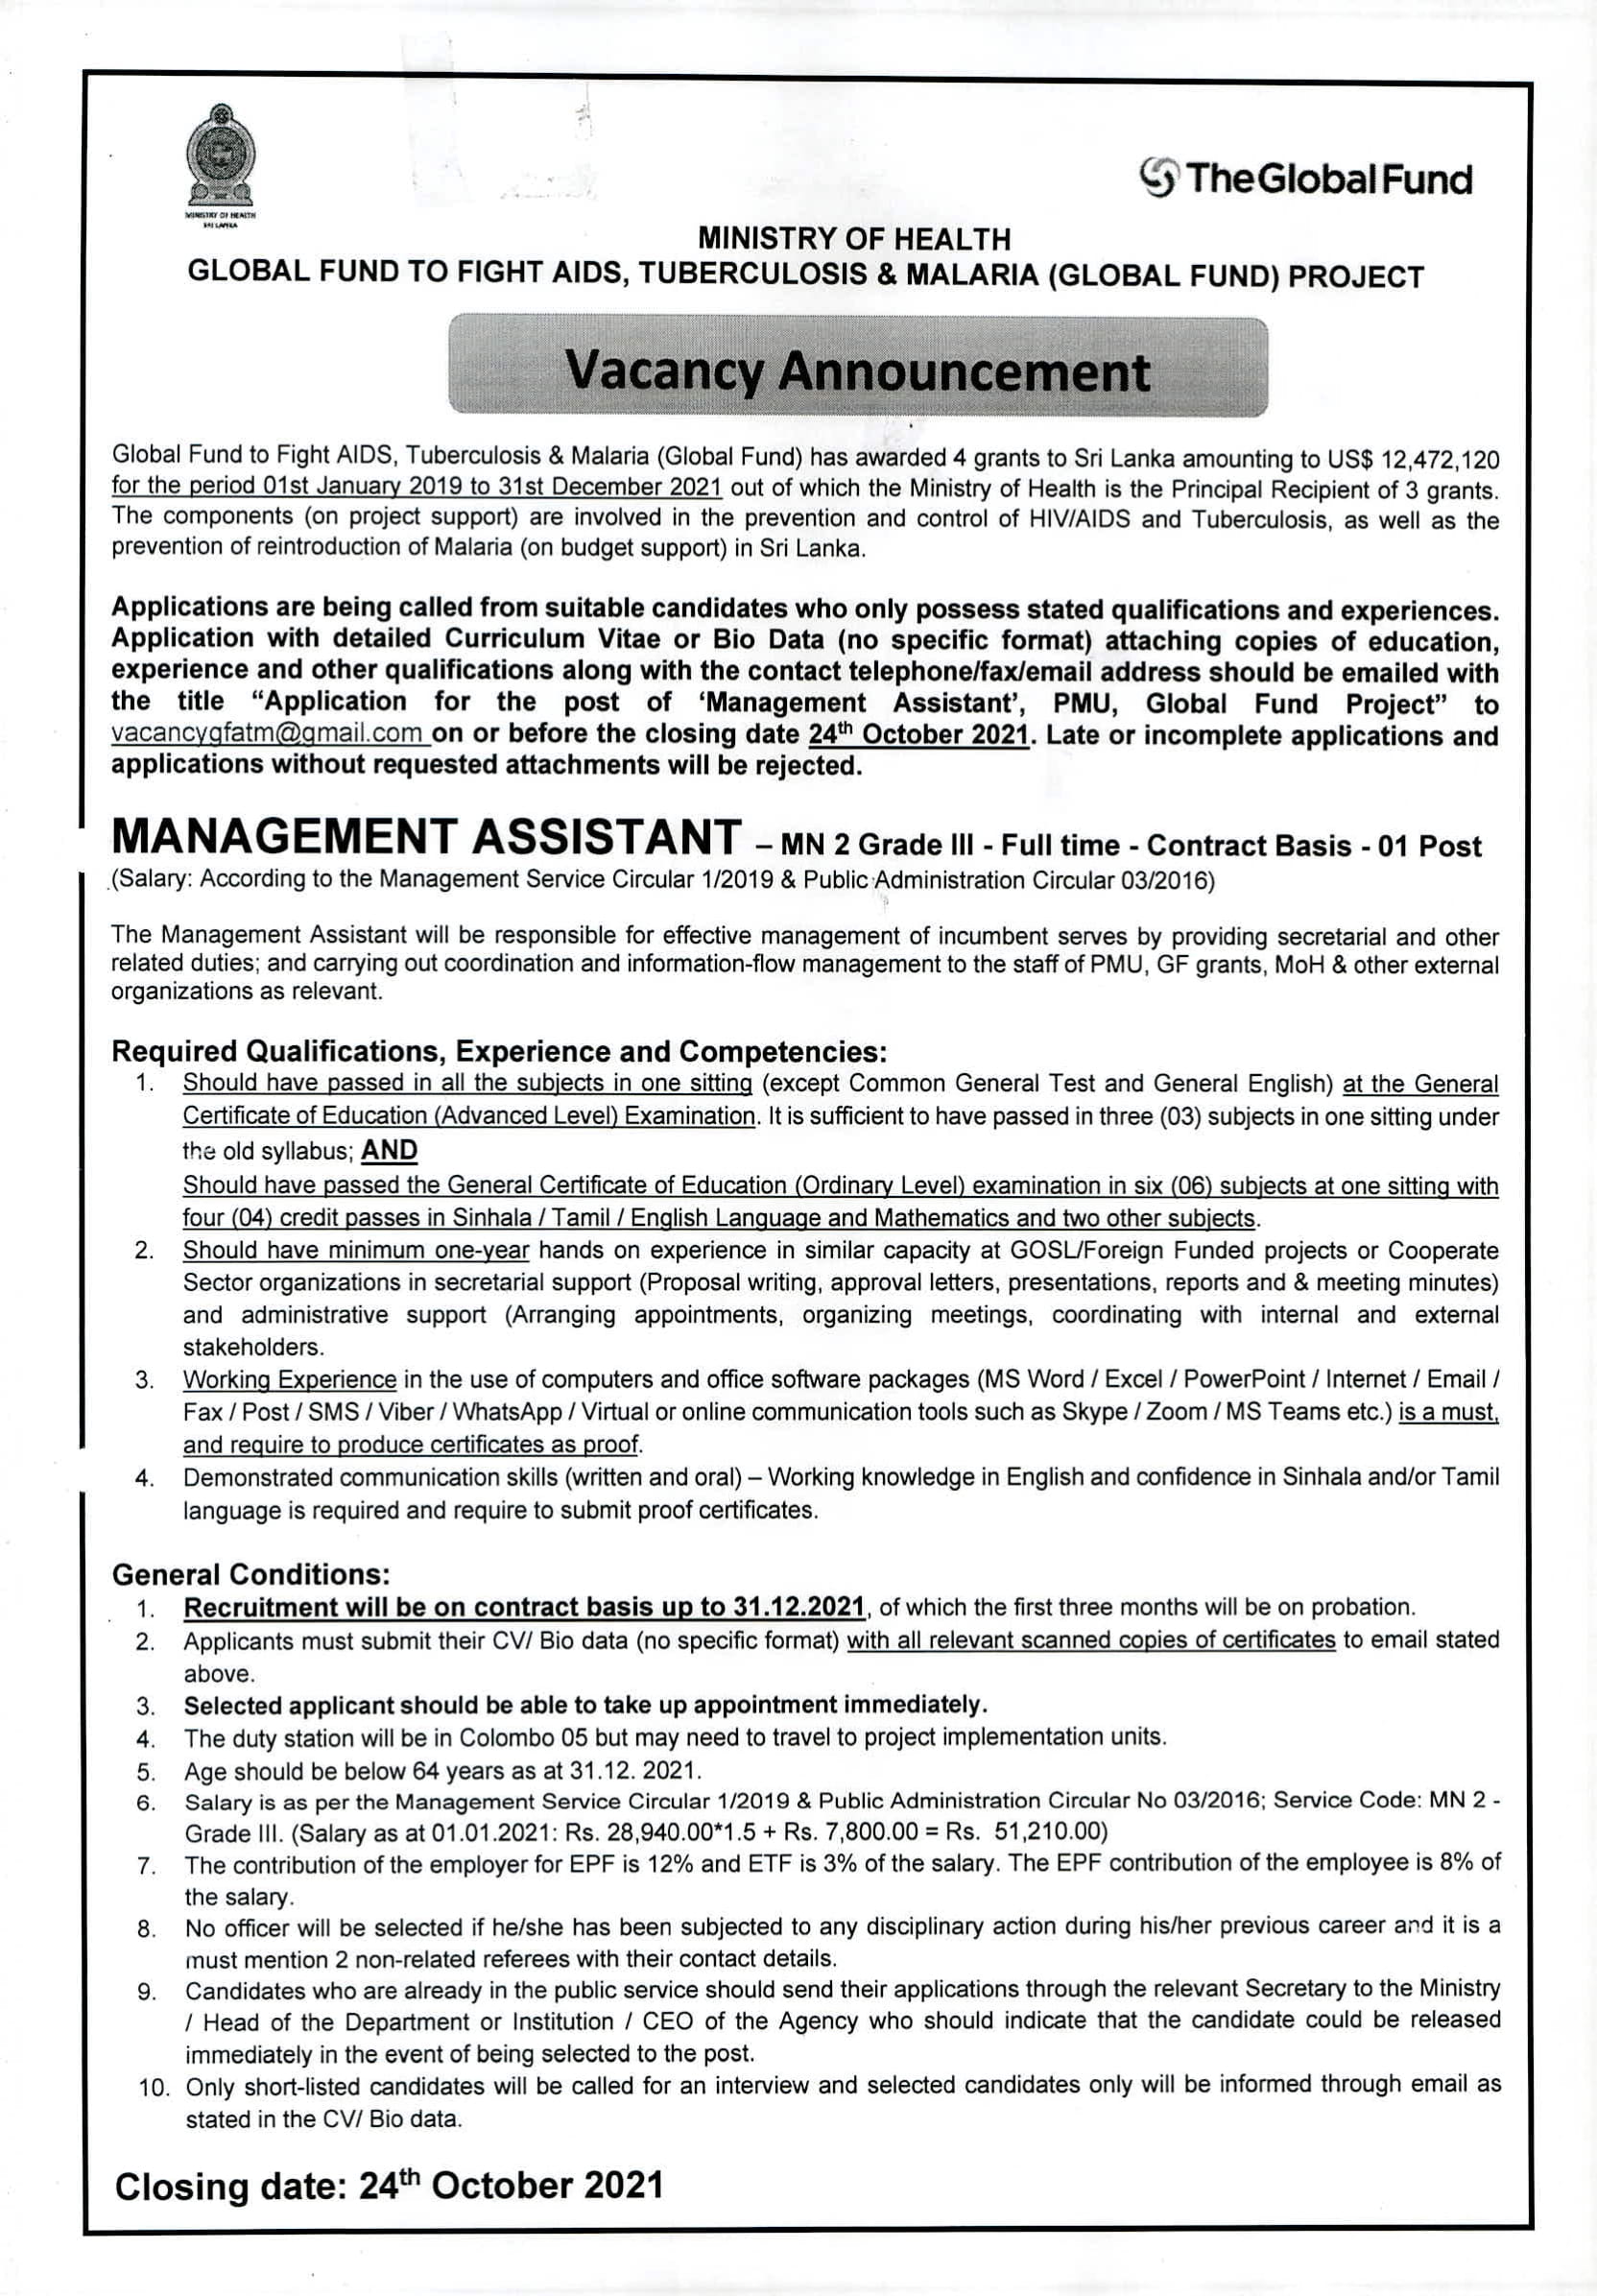 Management Assistant Job Vacancy in Ministry of Health Details